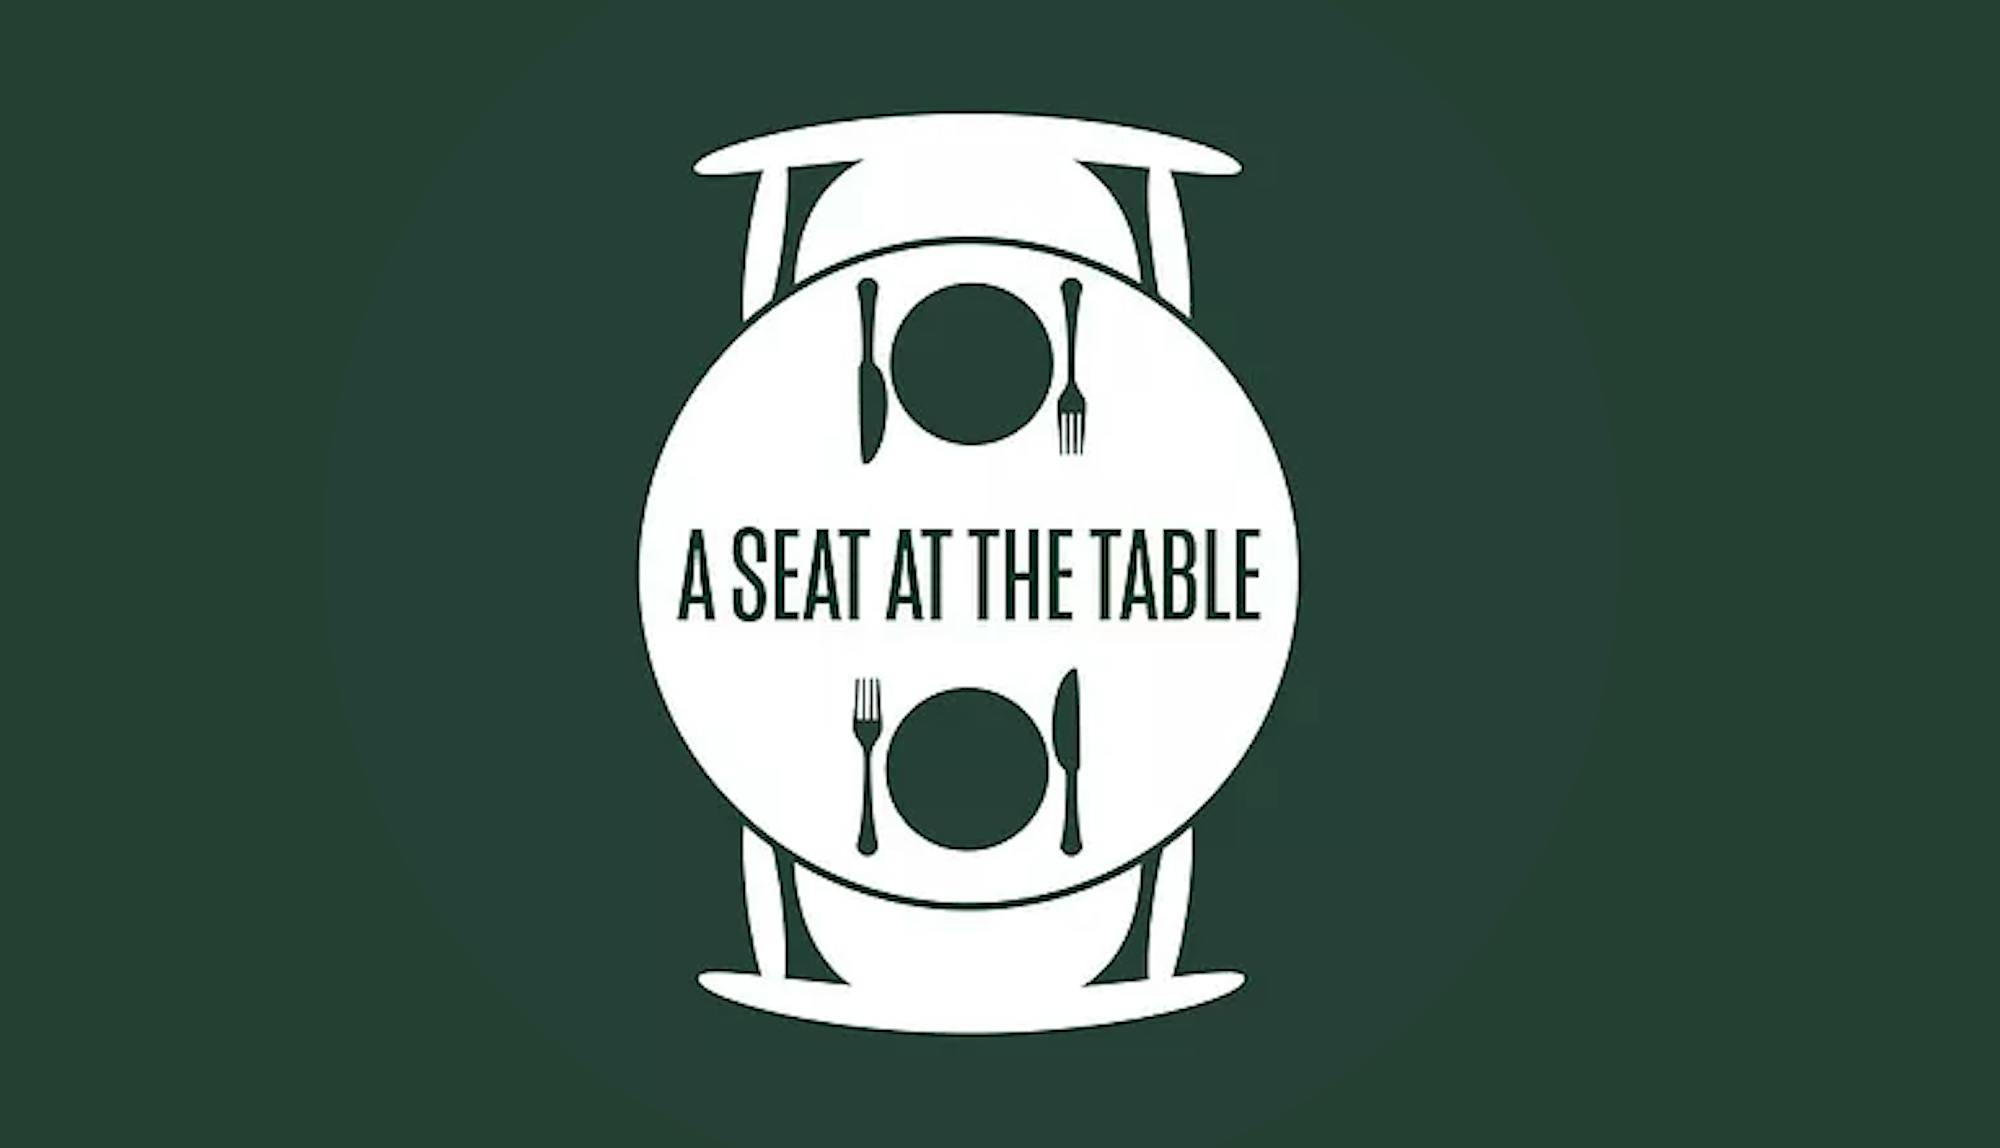 Walpole Editorial  Why hospitality urgently needs 'a seat at the table' by Lisa Grainger 